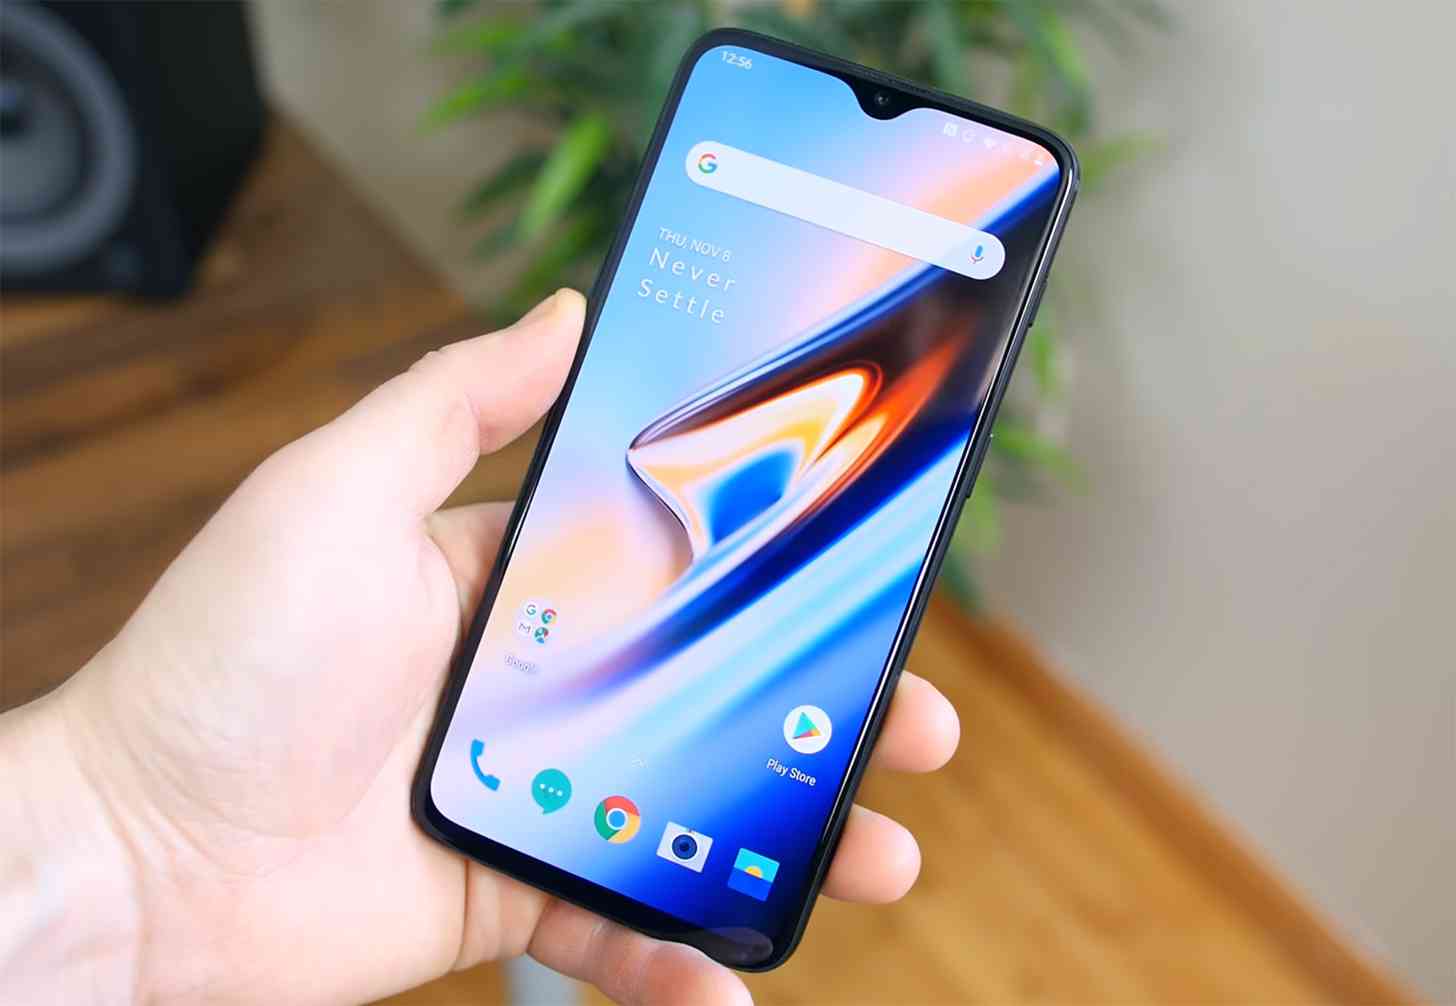 OnePlus 6T hands-on video